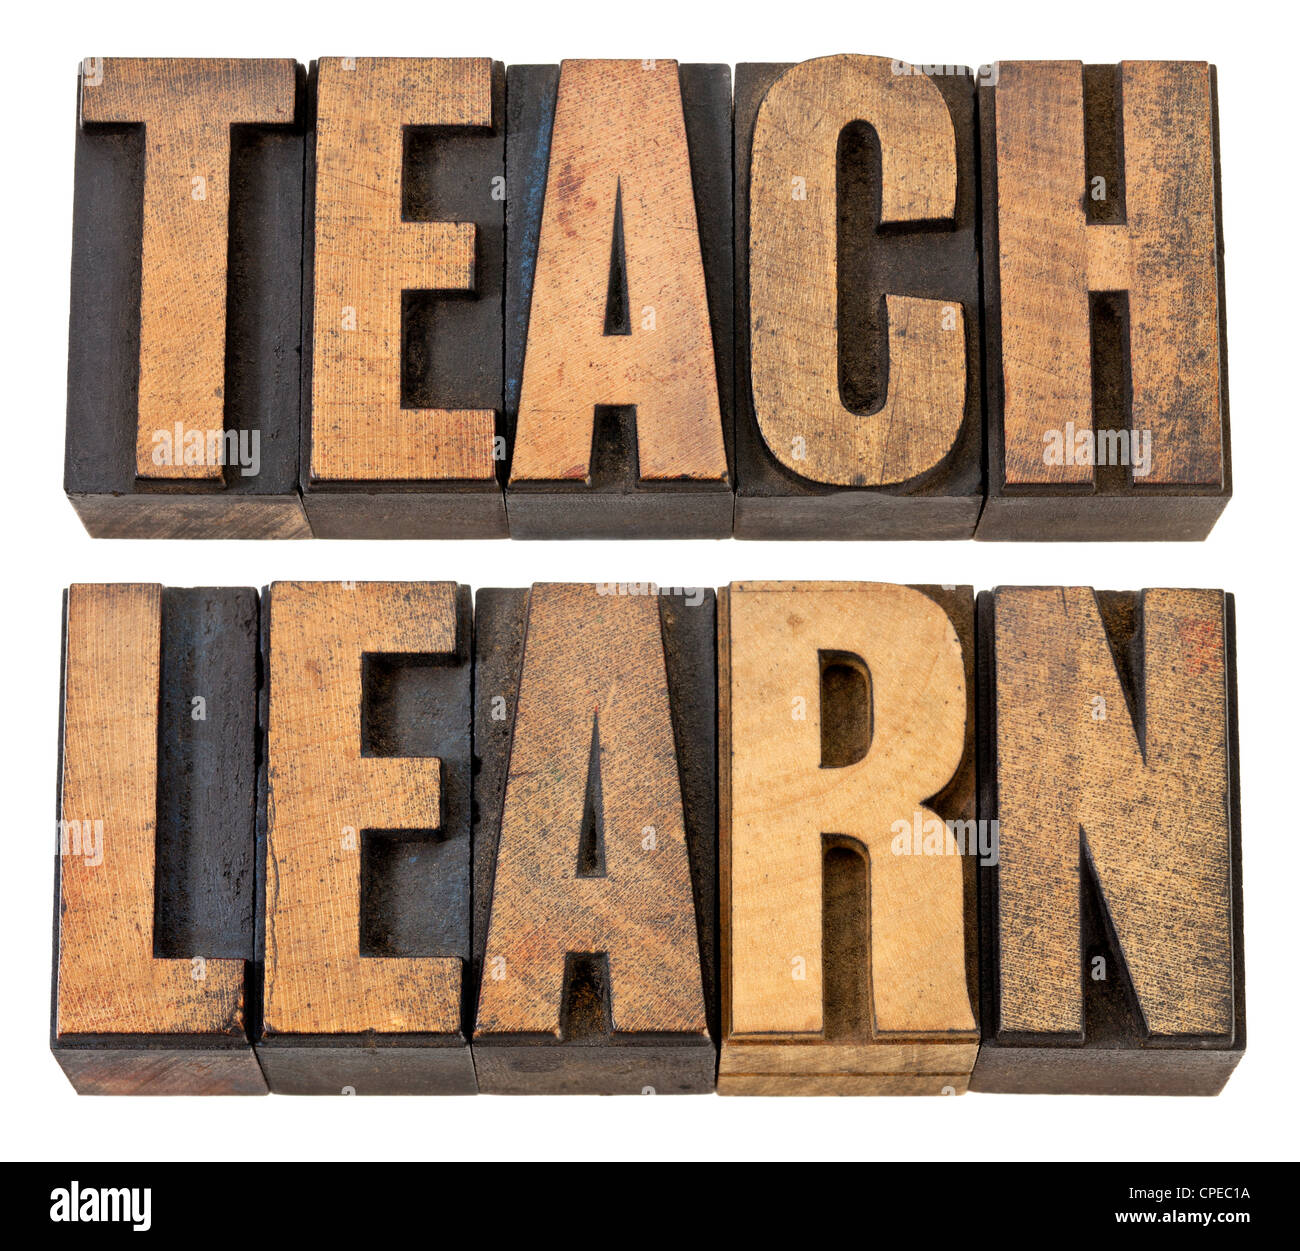 teach and learn - education concept - isolated words in vintage letterpress wood type Stock Photo